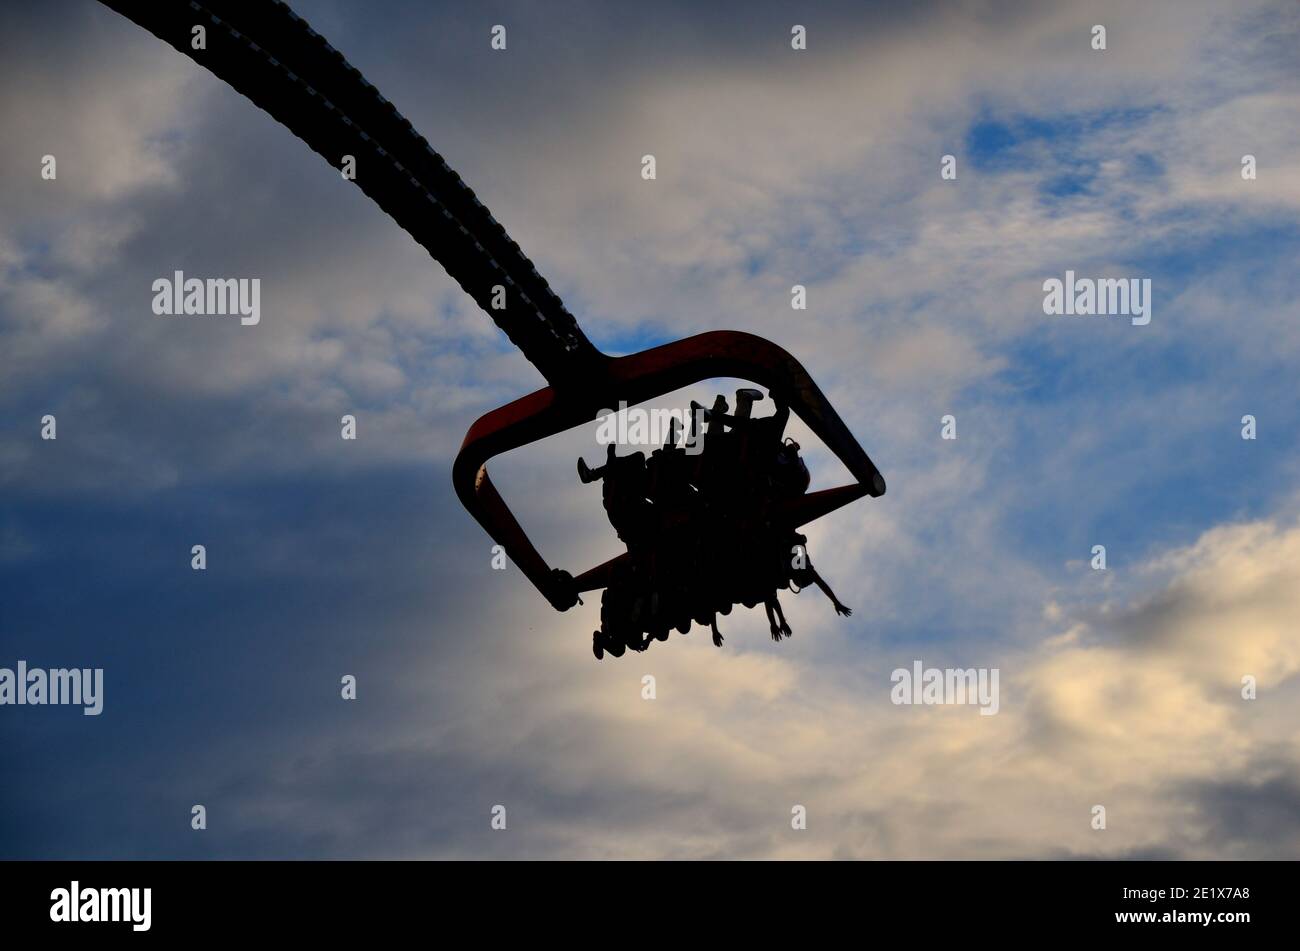 theme park with people in the air and sky Stock Photo